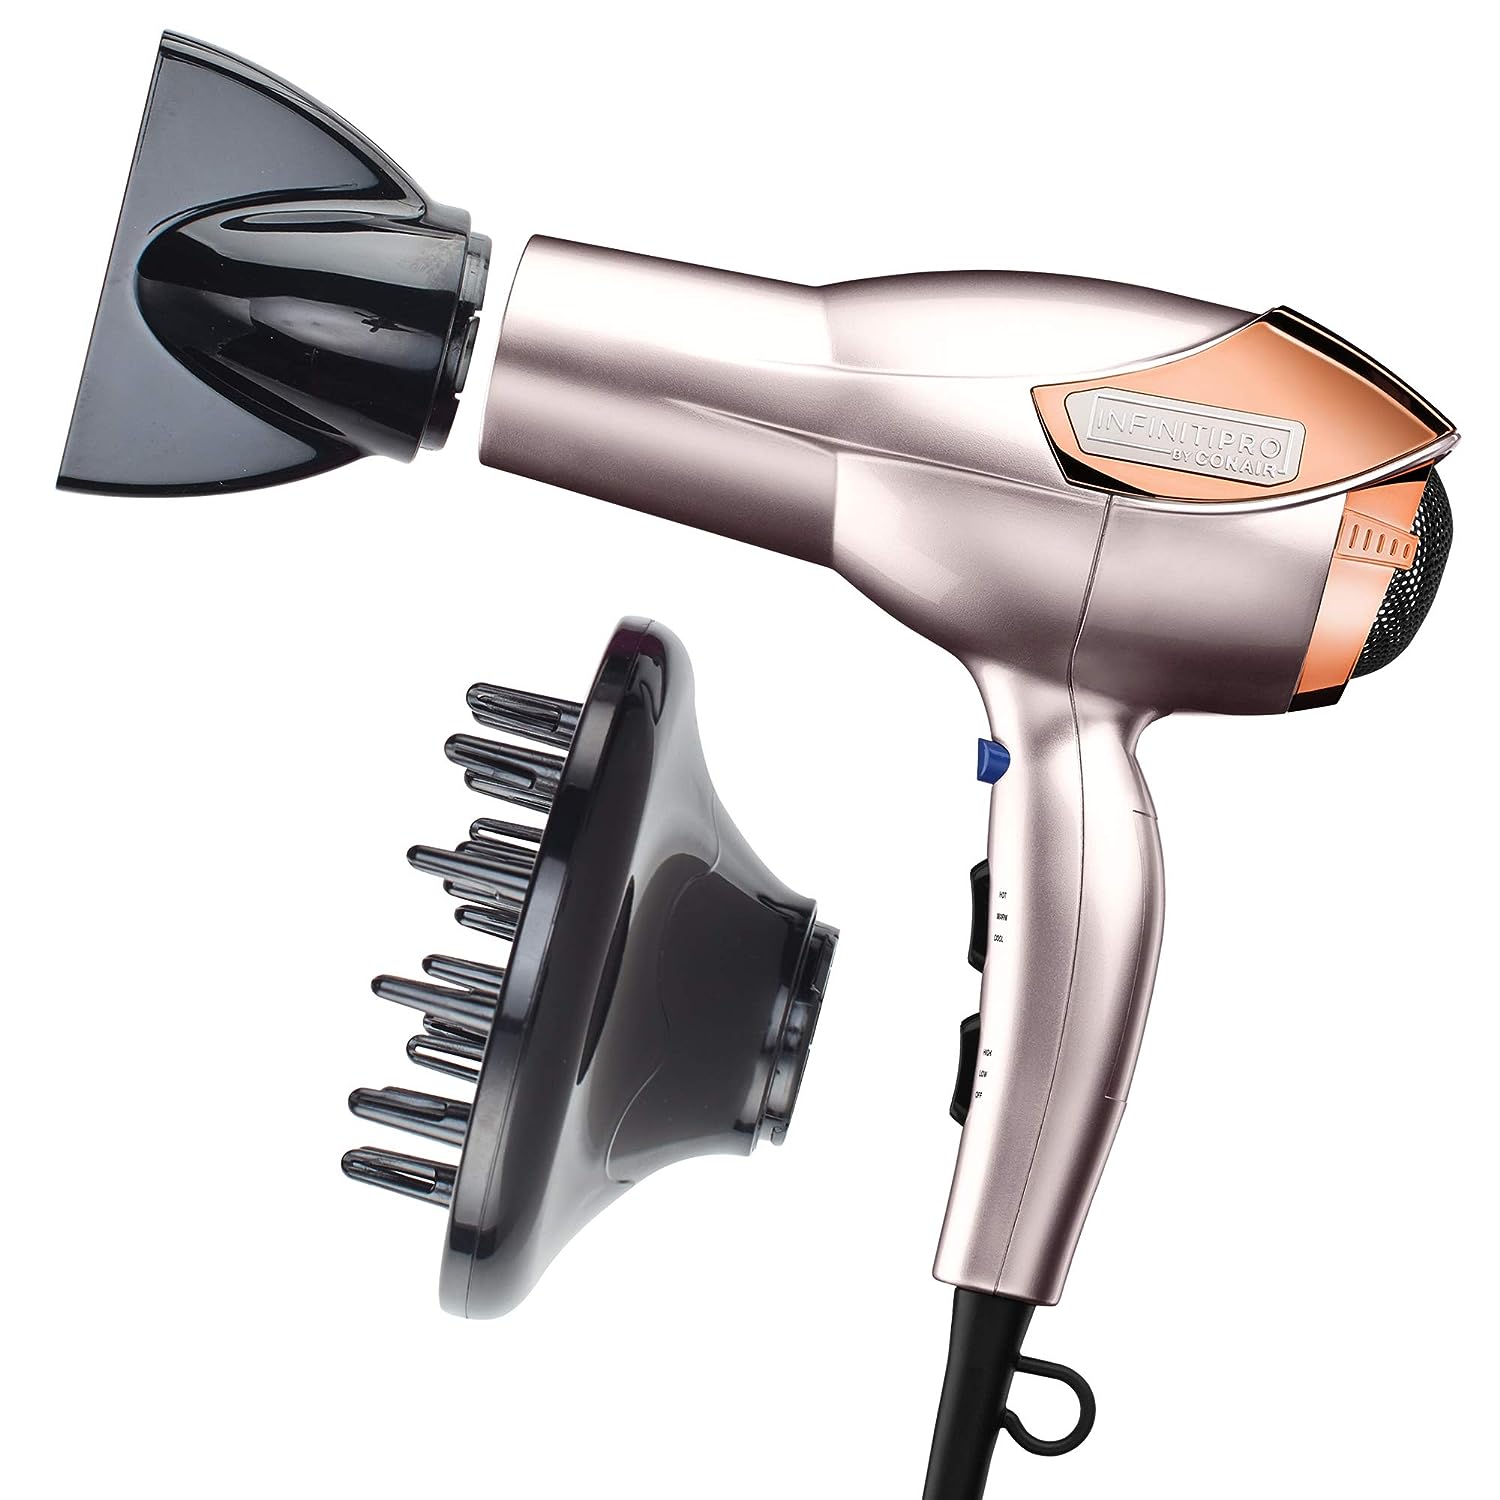 Conair miniPRO Hair Dryer Review: Powerful and Portable